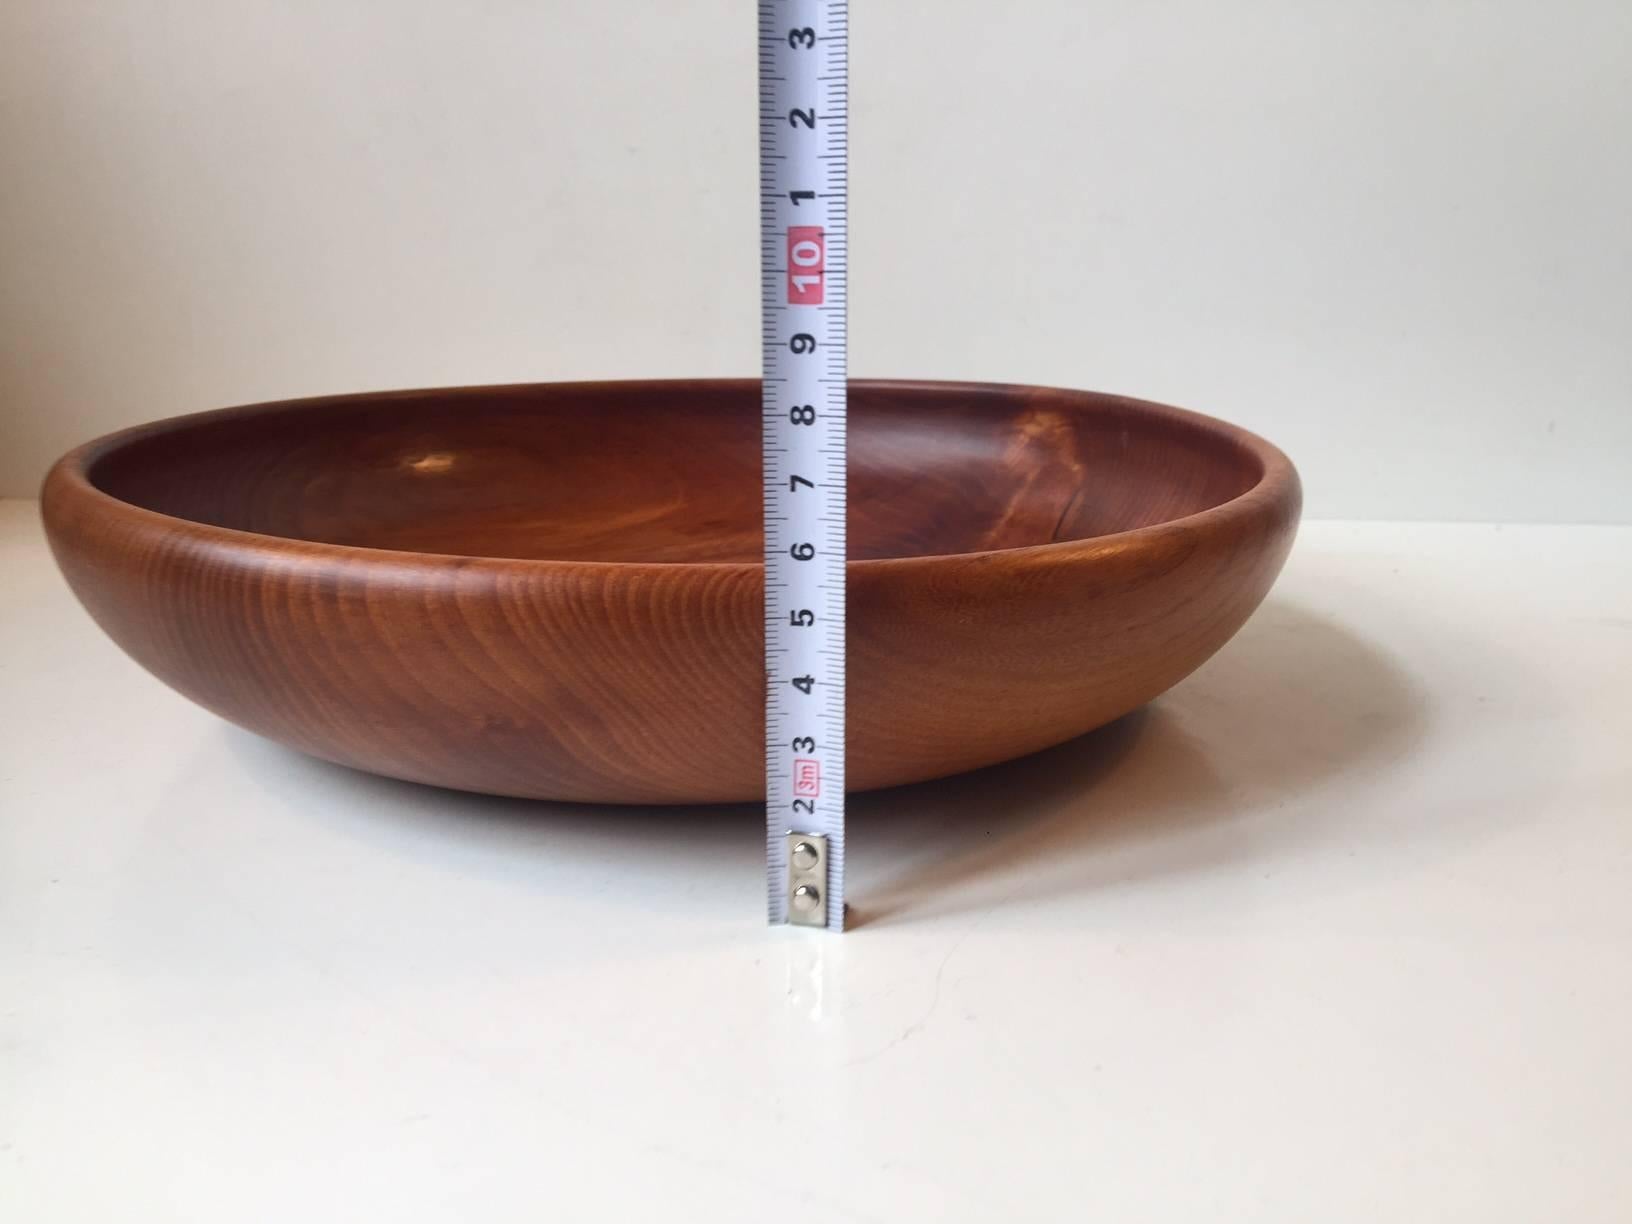 Handmade bowl of solid Siamese teak with emphasis on the beautiful grains. Manufactured and designed by Kay Bojesen in his workshop in Copenhagen during the 1950s. It is stamped Kay Bojesen, Mønsterbeskyttet (patented), Denmark.